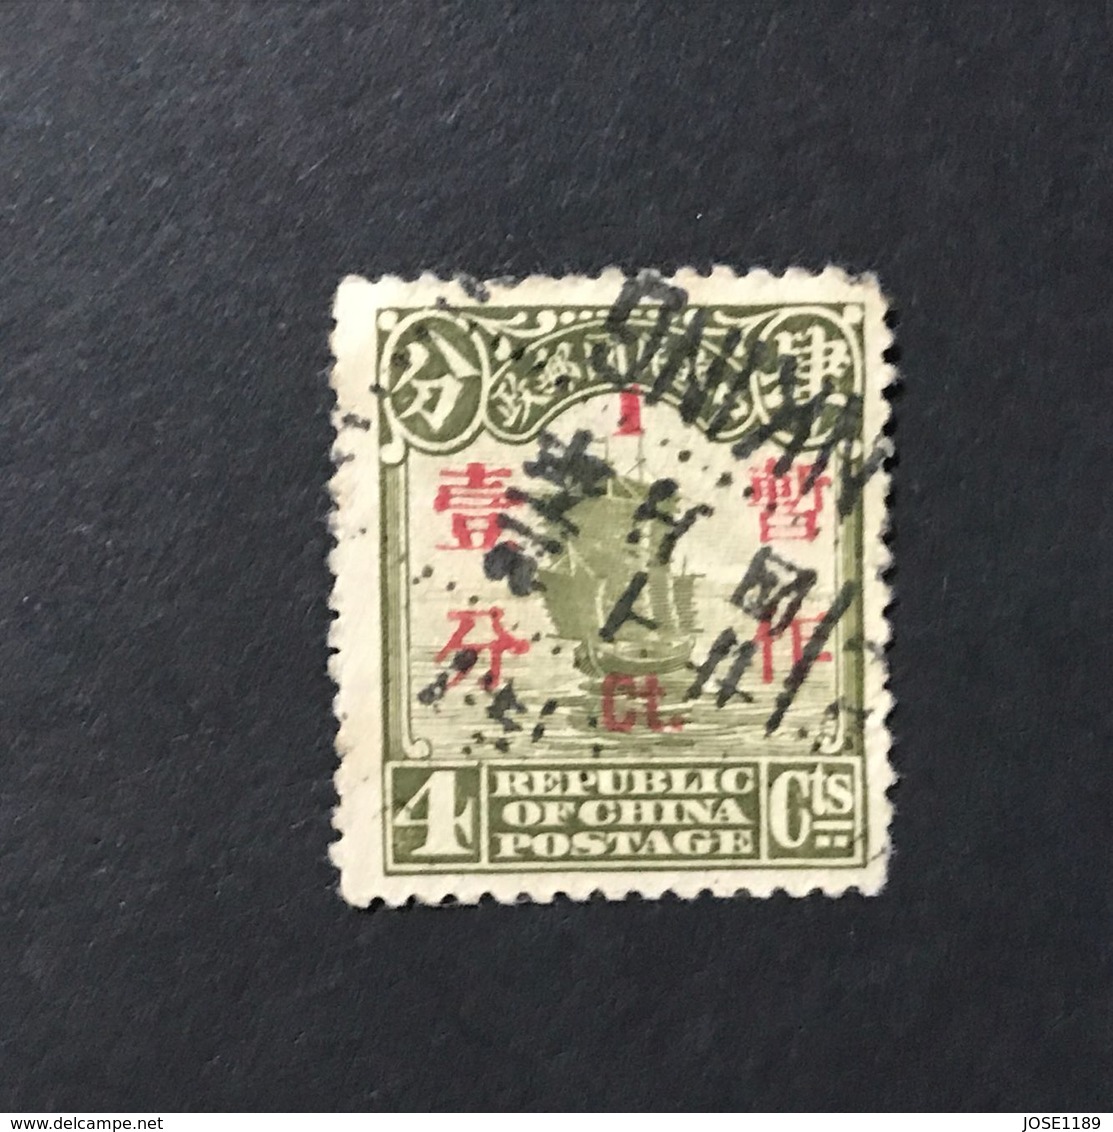 ◆◆◆ CHINA 1933  Surcharges On Junk Series ,Surch In Red.on Junk  Type, 2nd Peking Print  Complete  Used  AA951 - 1912-1949 Republic